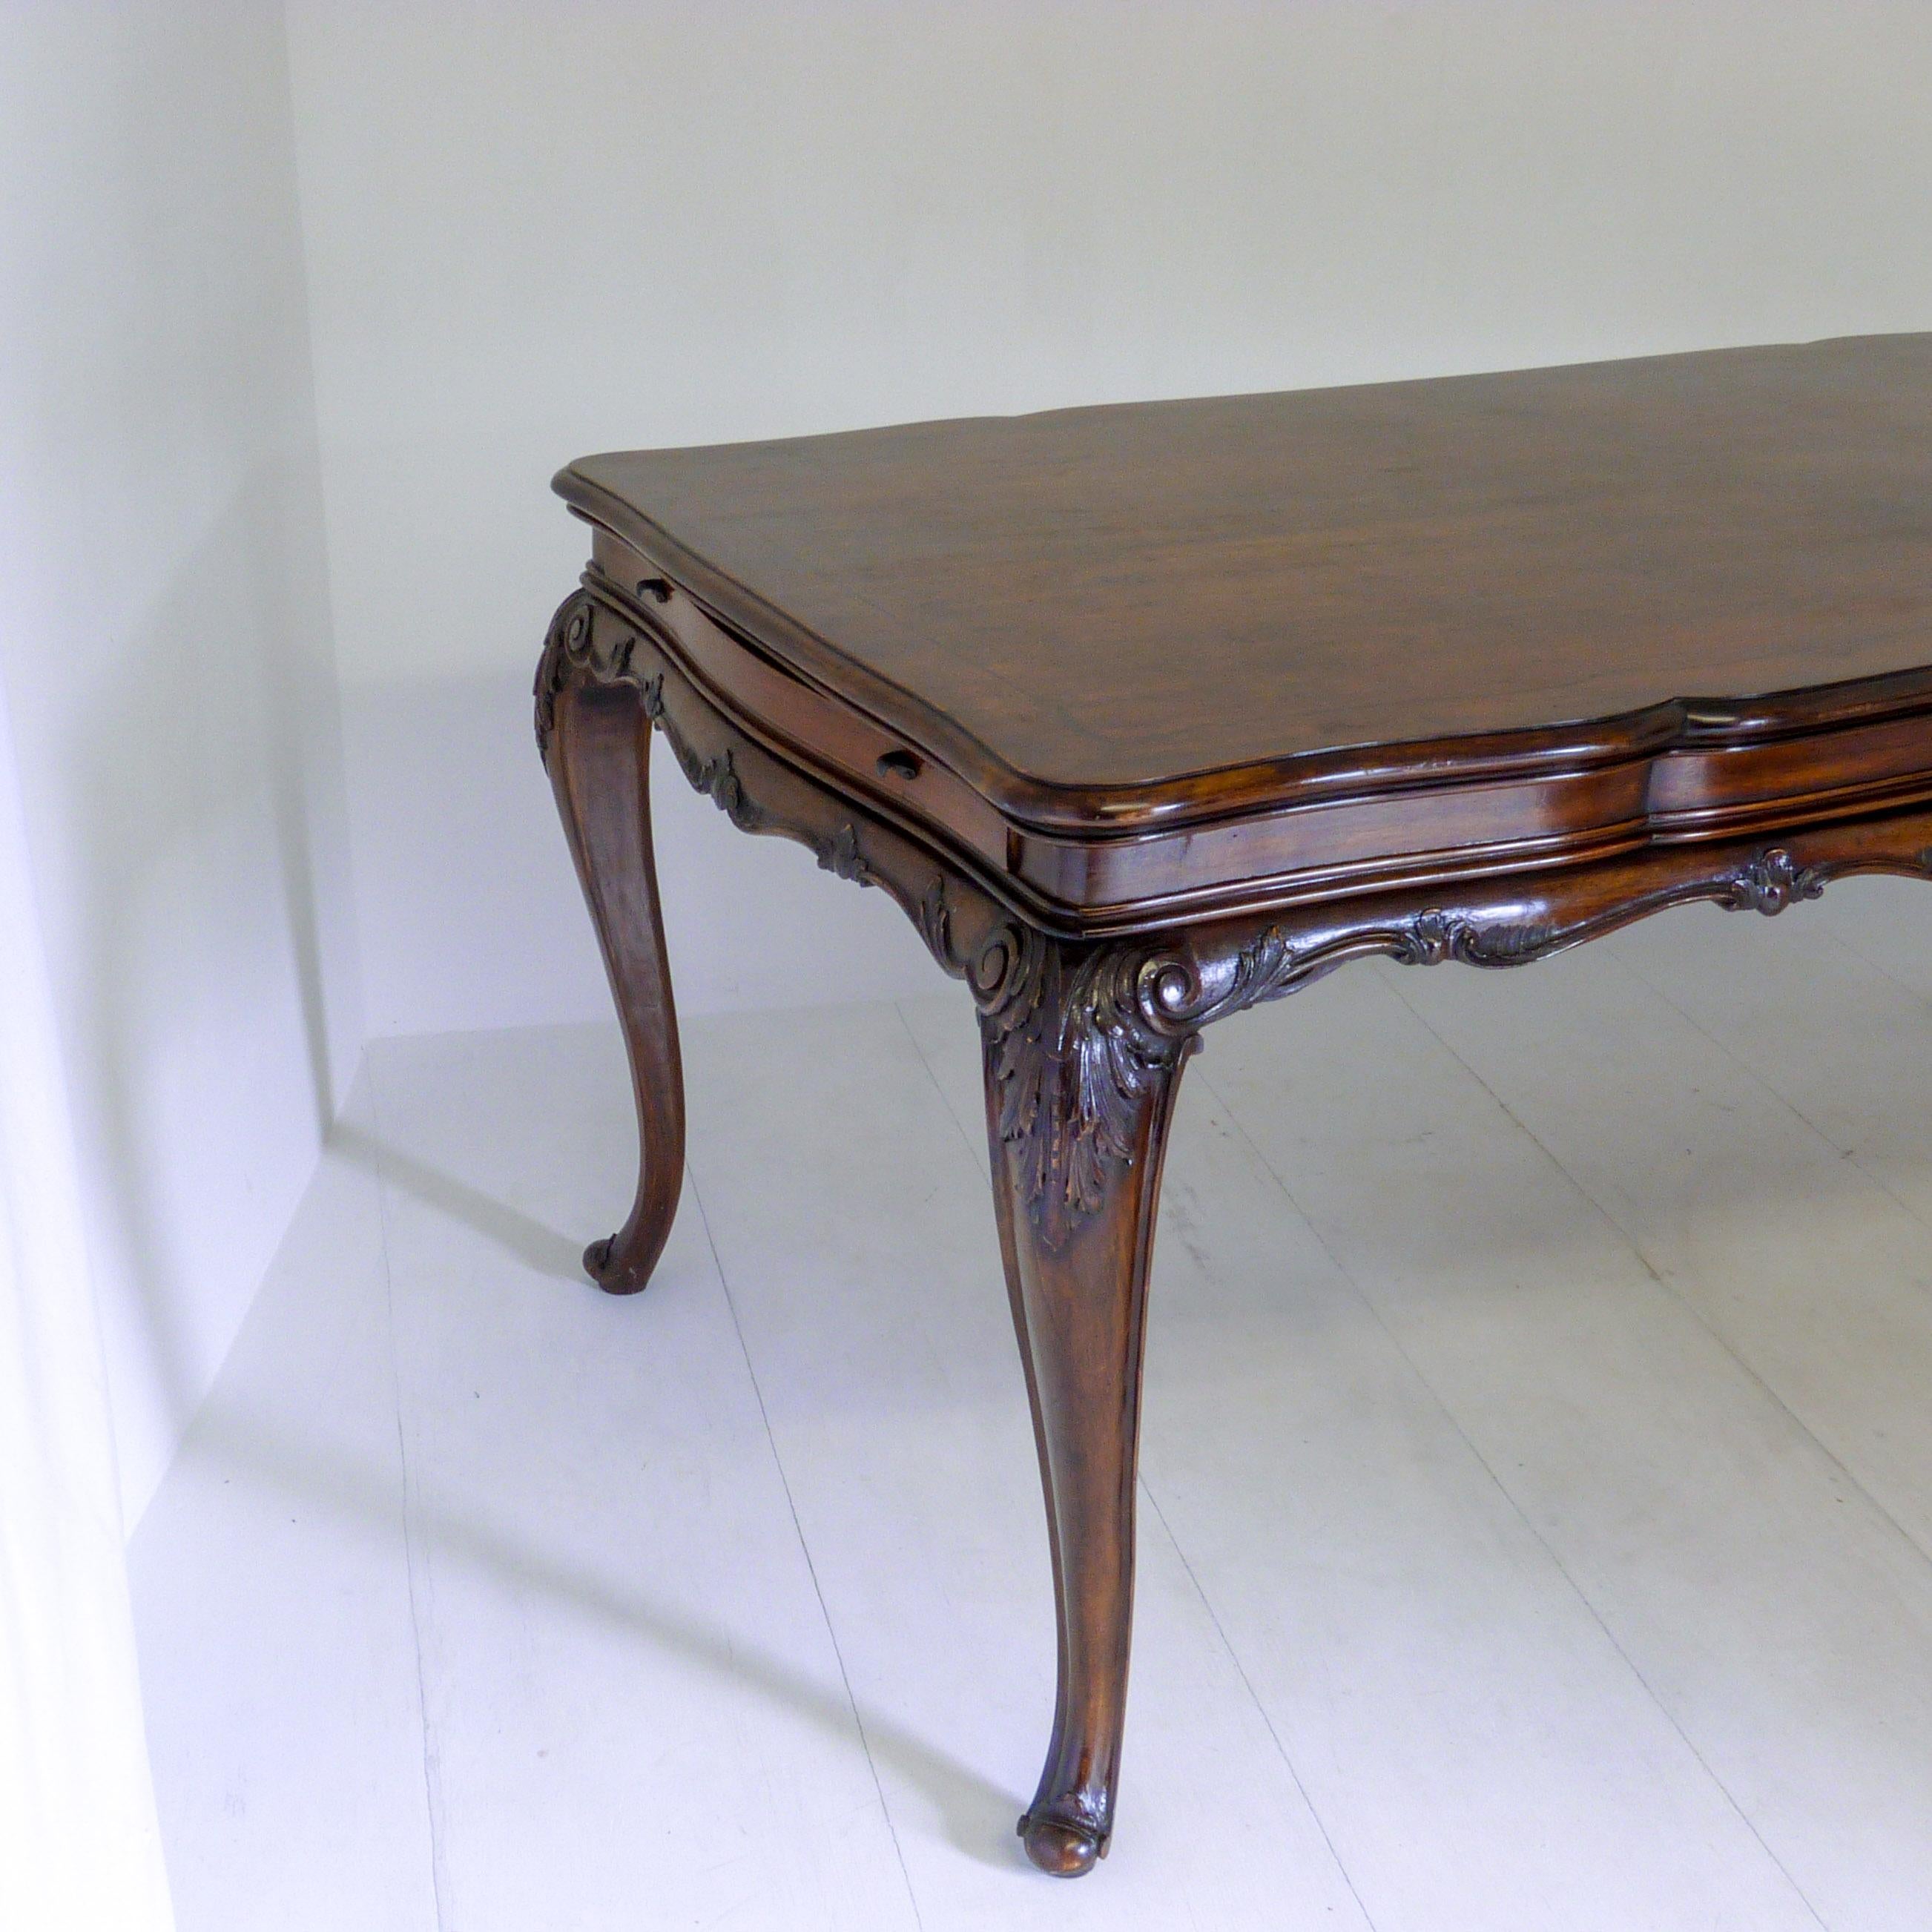 This is a old fruitwood reproduction of a 18th century French dining table, probably made in the 1950s. This piece could equally be used as a centre table, desk or shop fitting. Very elegant cabriole legs with carved acanthus to the shoulders and a